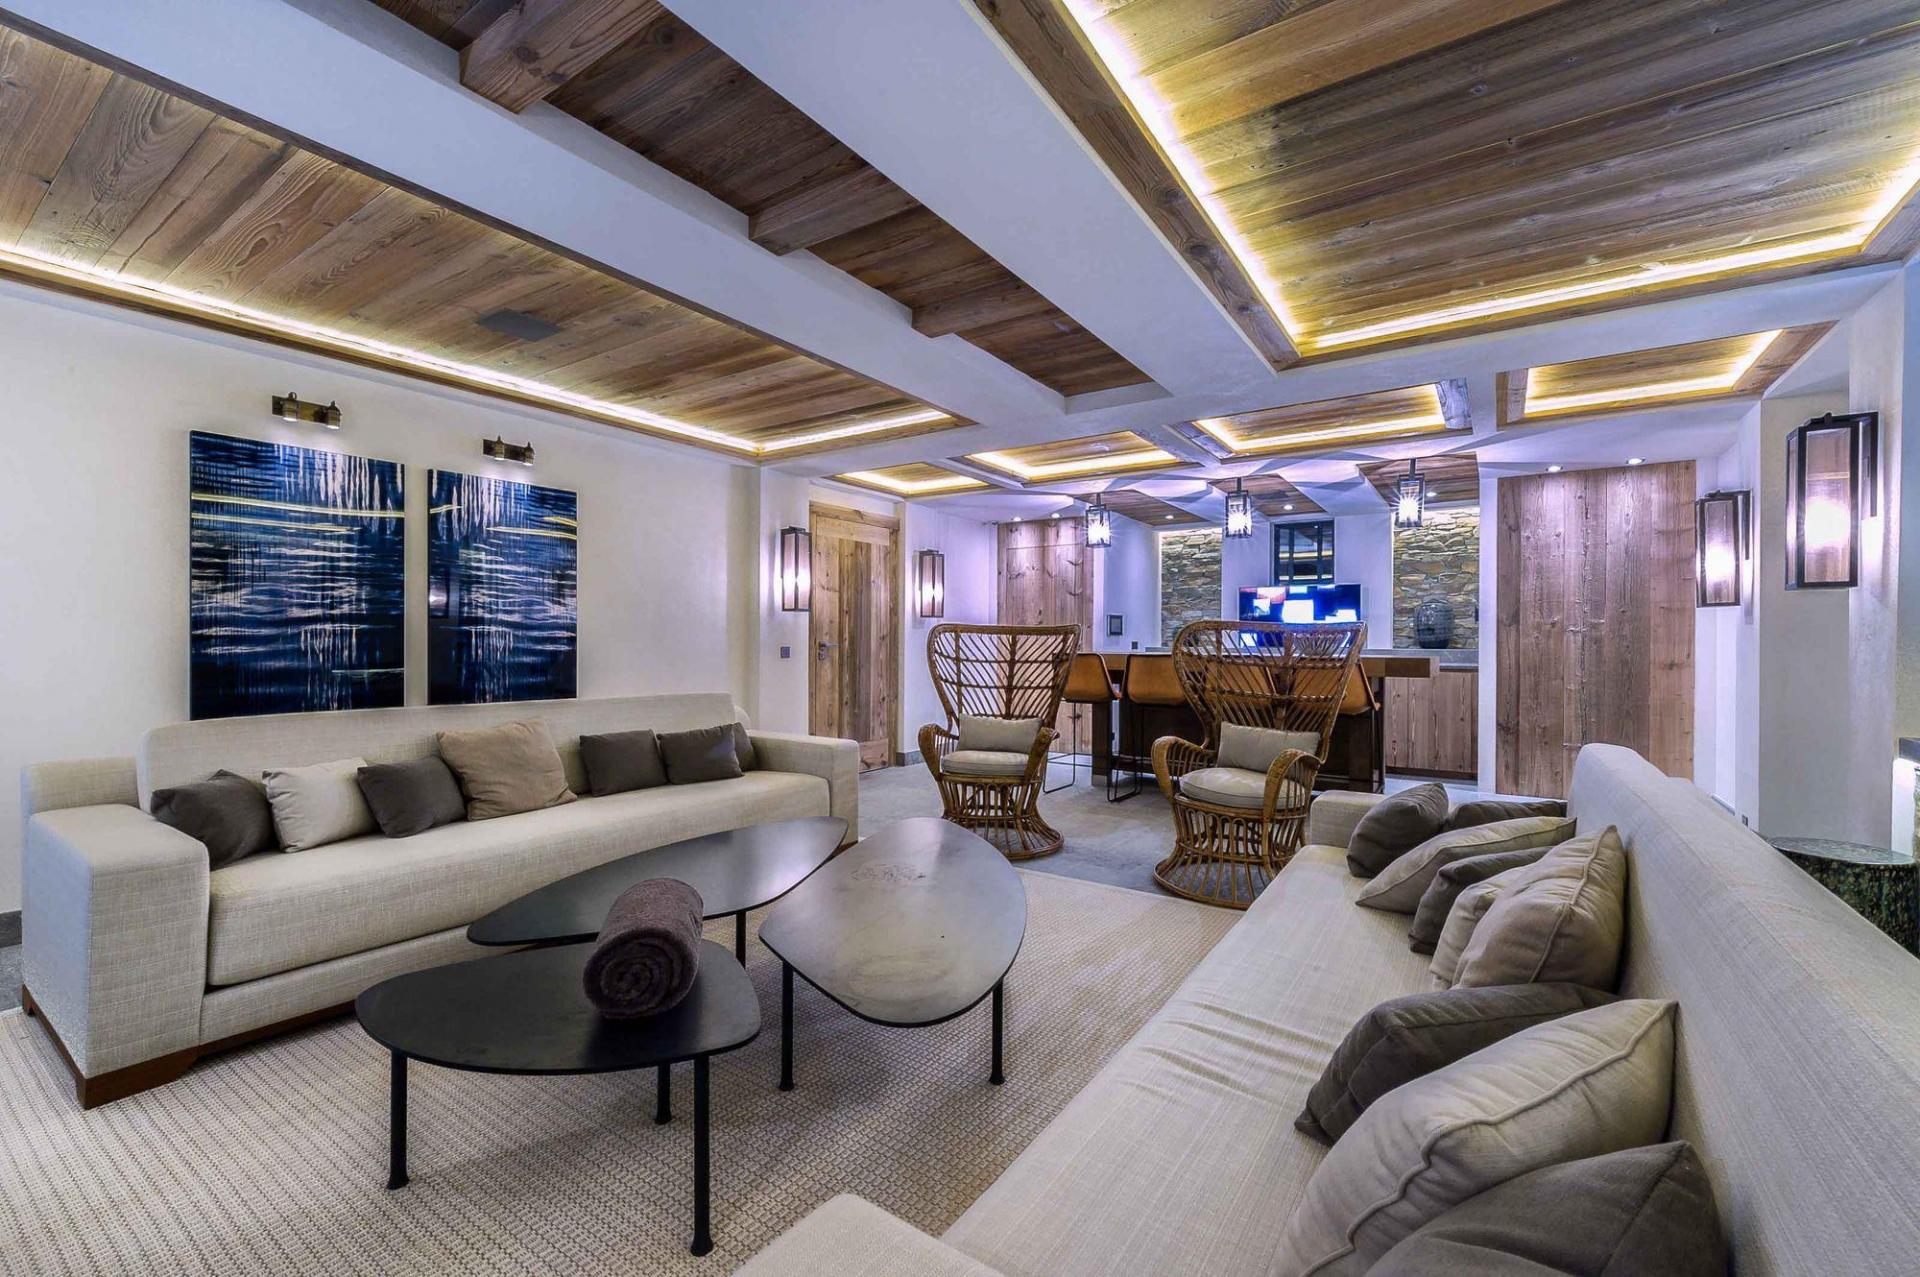 THE BAR AND ITS LOUNGE IN A CHALET TO RENT IN COURCHEVEL